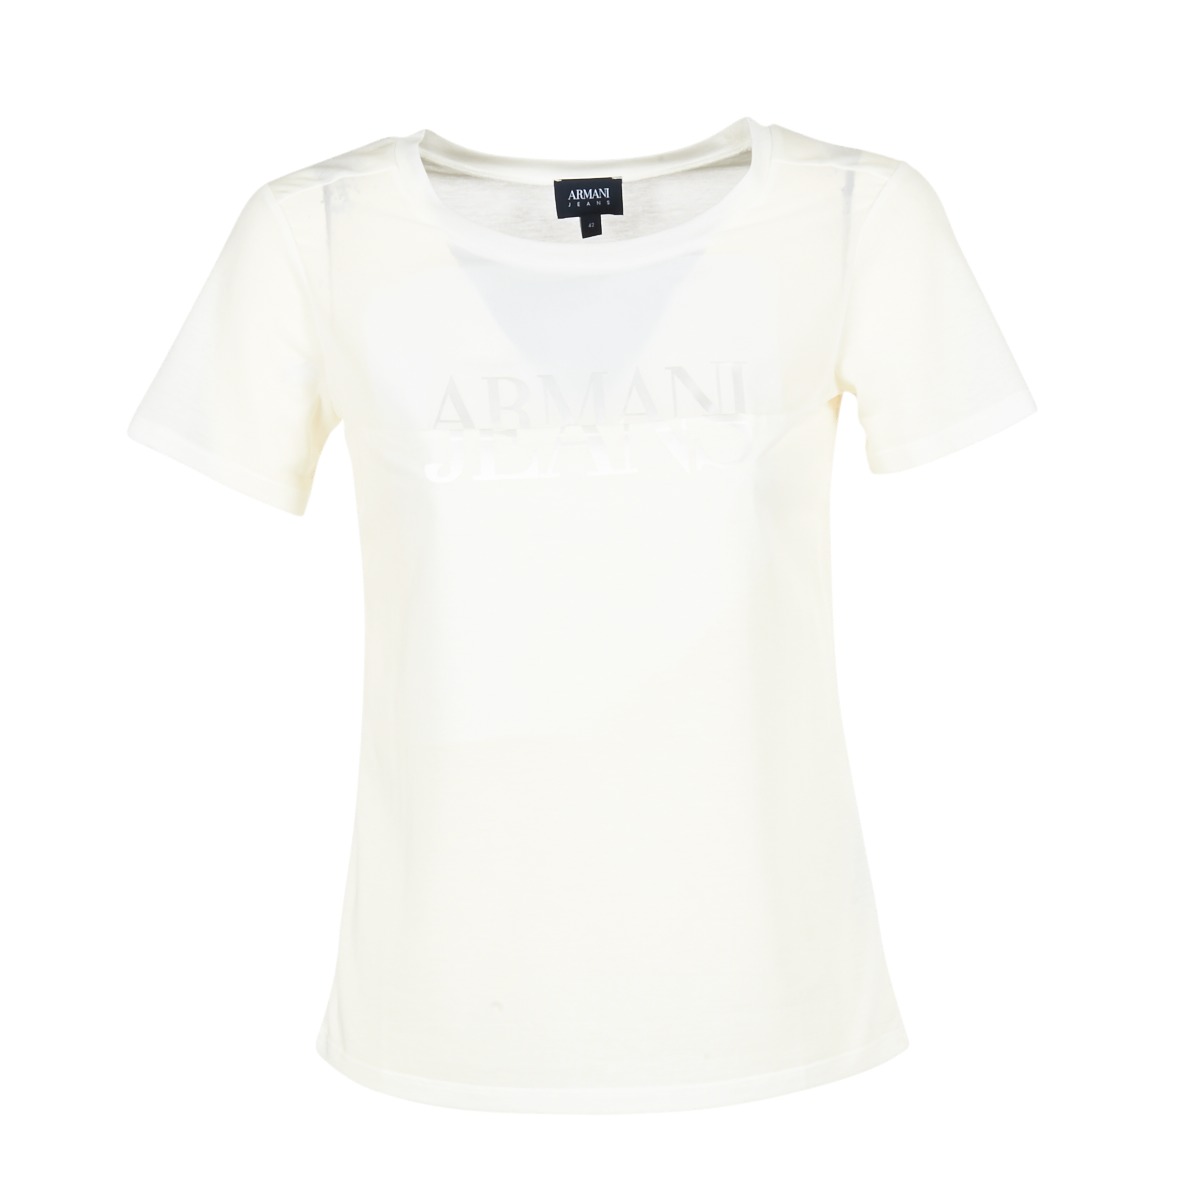 Armani jeans KAJOLA - Fast delivery | Spartoo Europe Clothing short-sleeved t-shirts Women 113,60 €